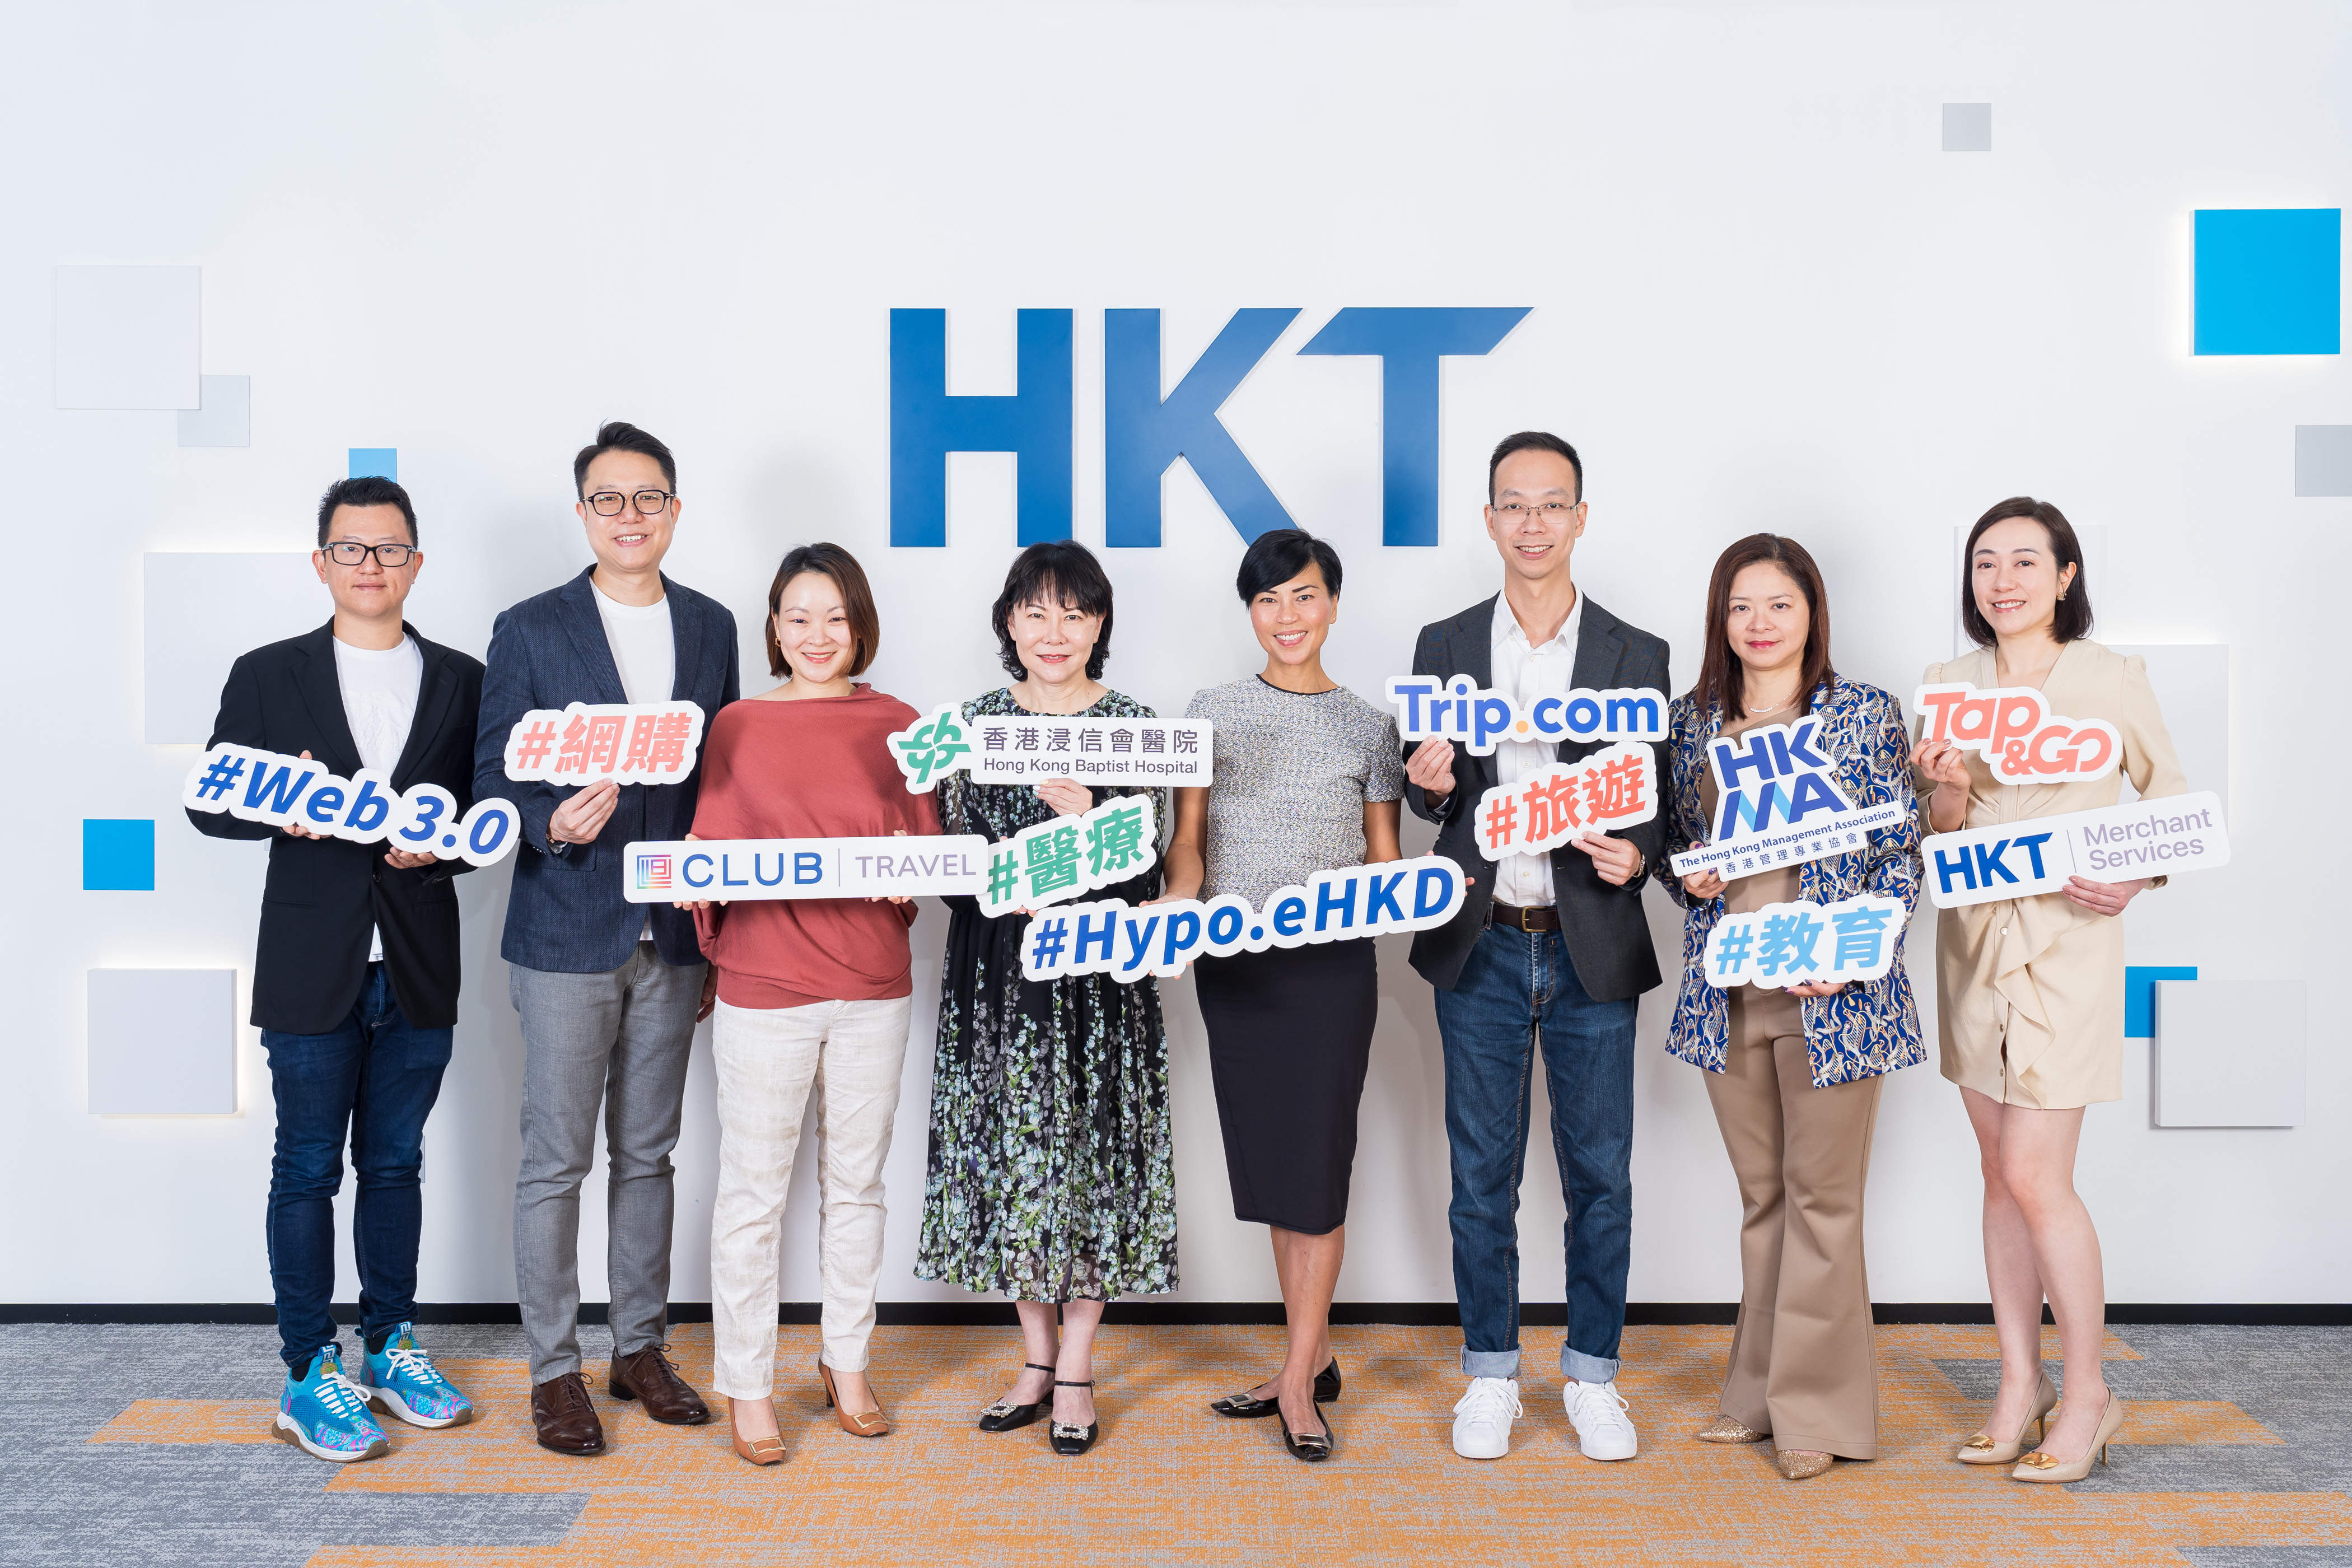 (Left to right) Felix Tsui, Chief Strategy Officer, Digital Ventures, HKT; Anthony Lam, Vice President, The Club, Digital Ventures, HKT; Terri Yang, Vice President, Loyalty and Strategic Business Development, Digital Ventures, HKT; Grace Wong, Director (Administration and Planning), Hong Kong Baptist Hospital; Monita Leung, Chief Executive Officer, Digital Ventures, HKT; Eddy Yip, Product & Marketing Director, Hong Kong and Taiwan & Territory Manager, Hong Kong, Trip.com; Titania Woo, Executive Director, Hong Kong Management Association; Heidi Chan, Alternate Chief Executive, HKT Payment Limited.